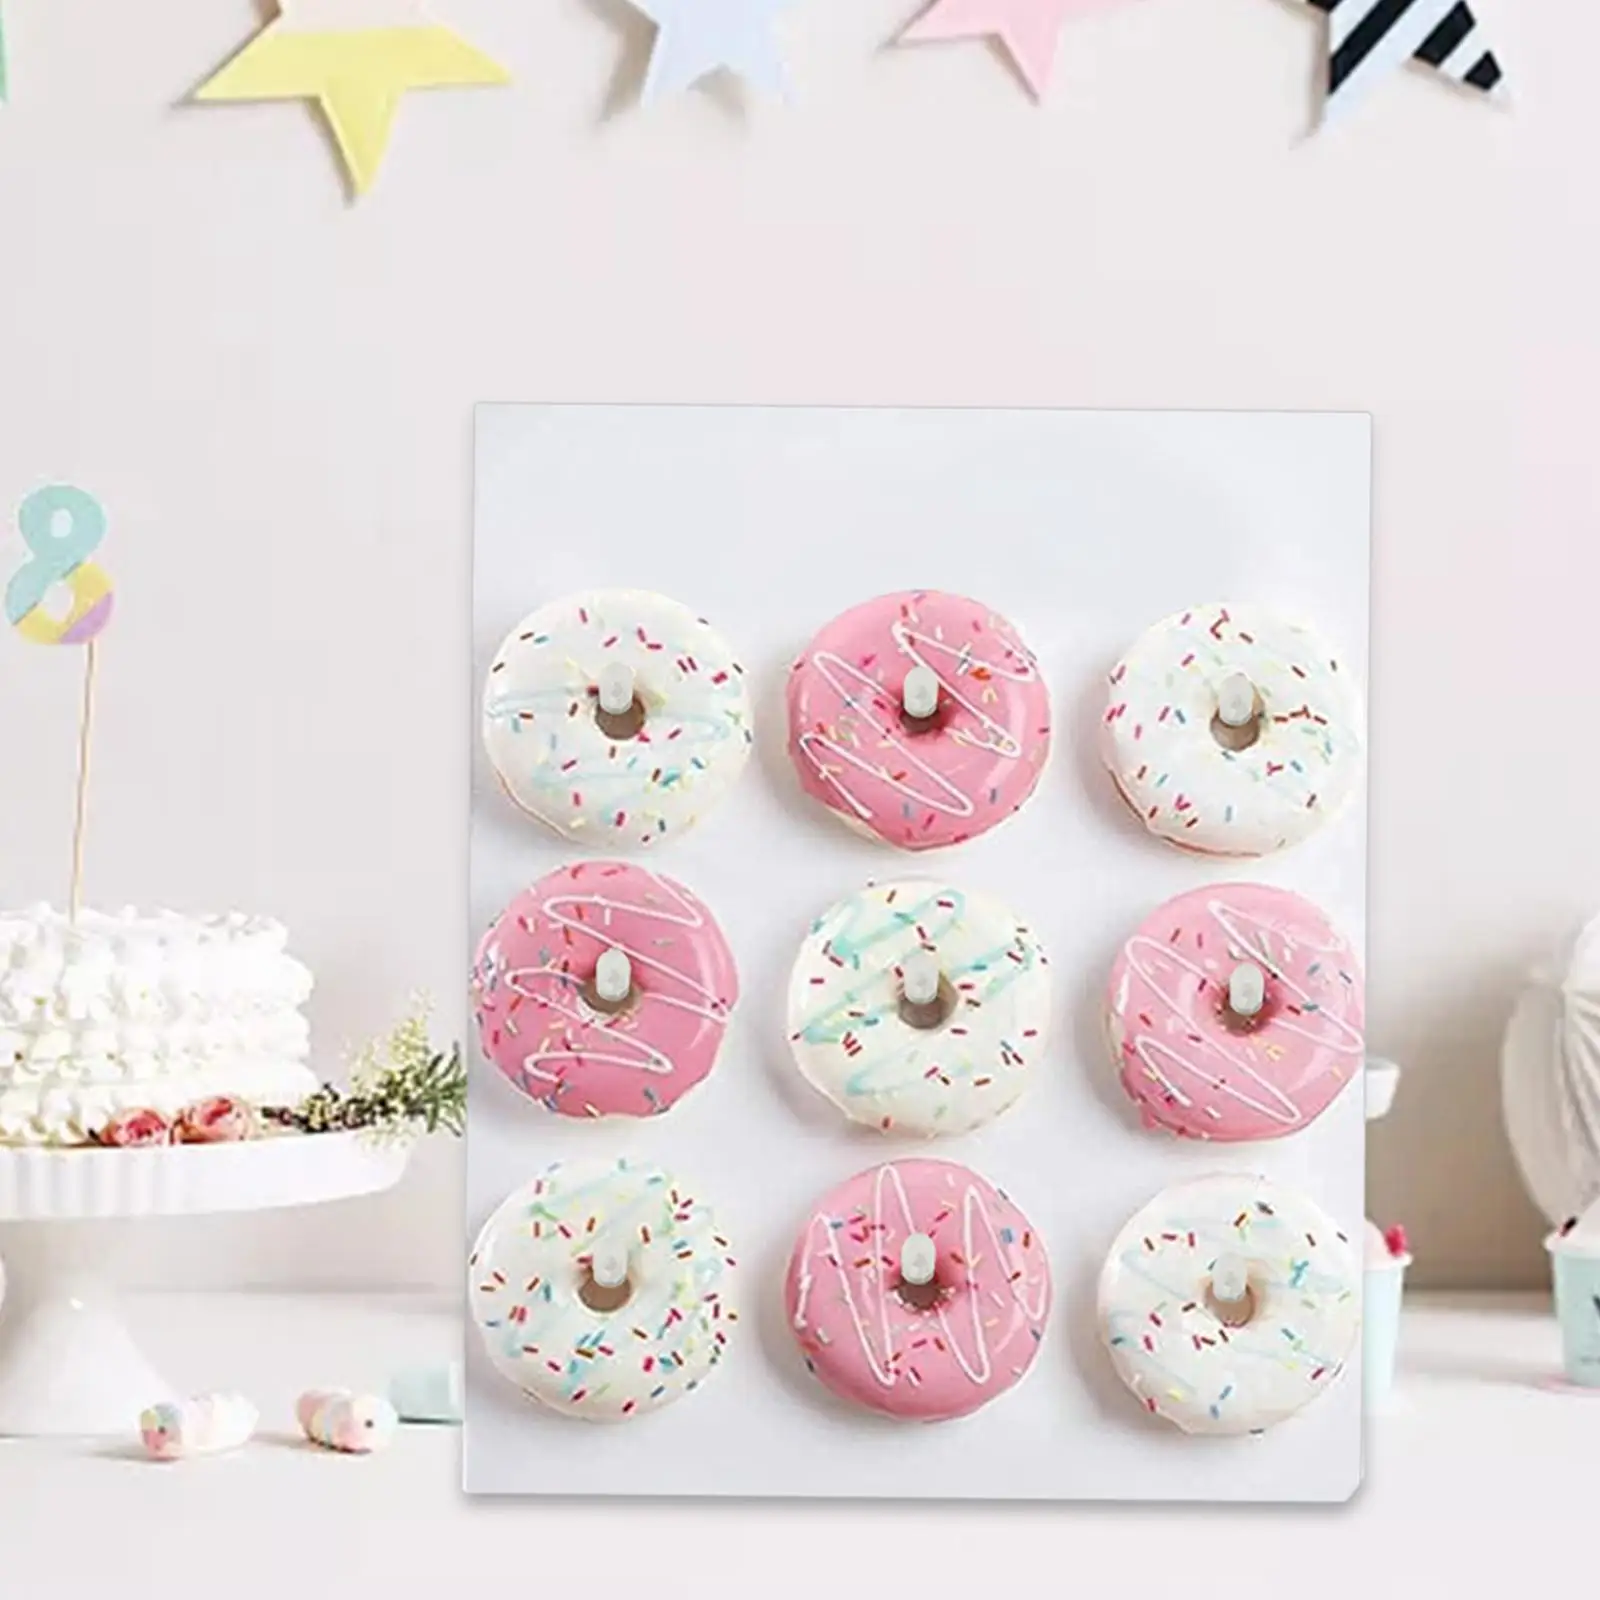 Donut Wall 9 Doughnuts Party Decorations White Donut Display Stand Reusable for Dessert Table Supplies Gathering Treat Holiday